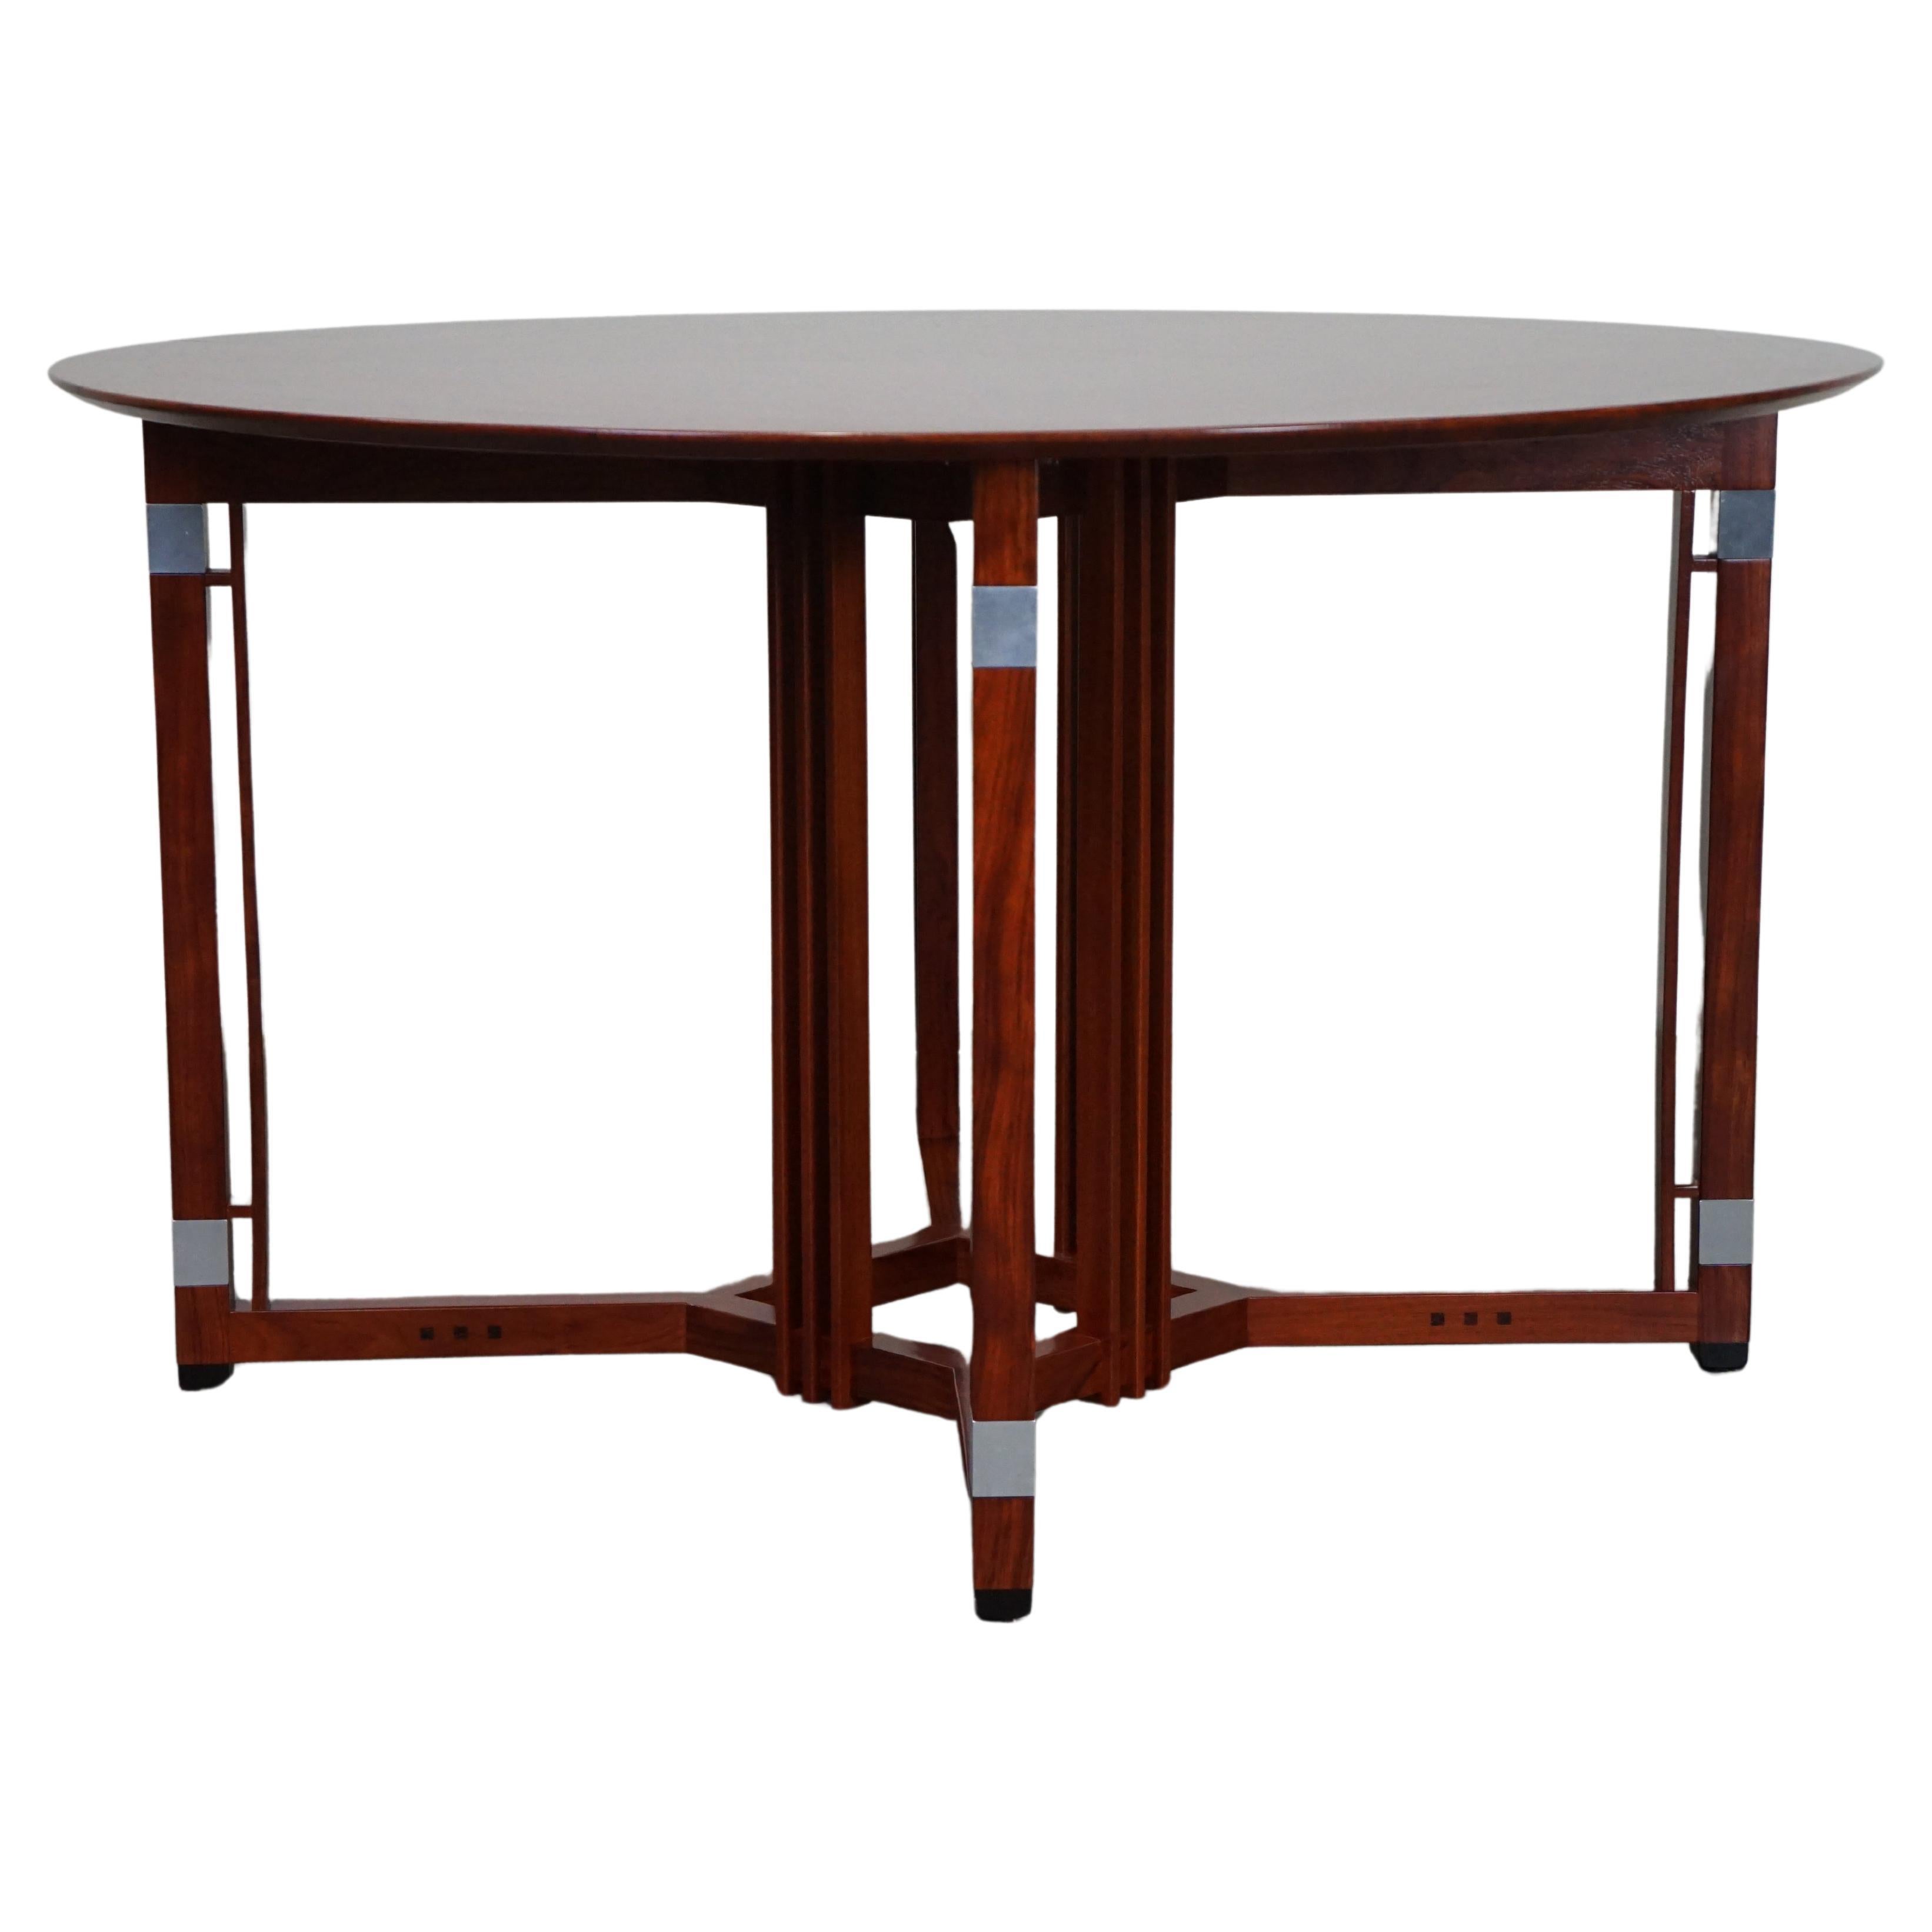 Schuitema round dining table Art Deco design from the Decoforma series.